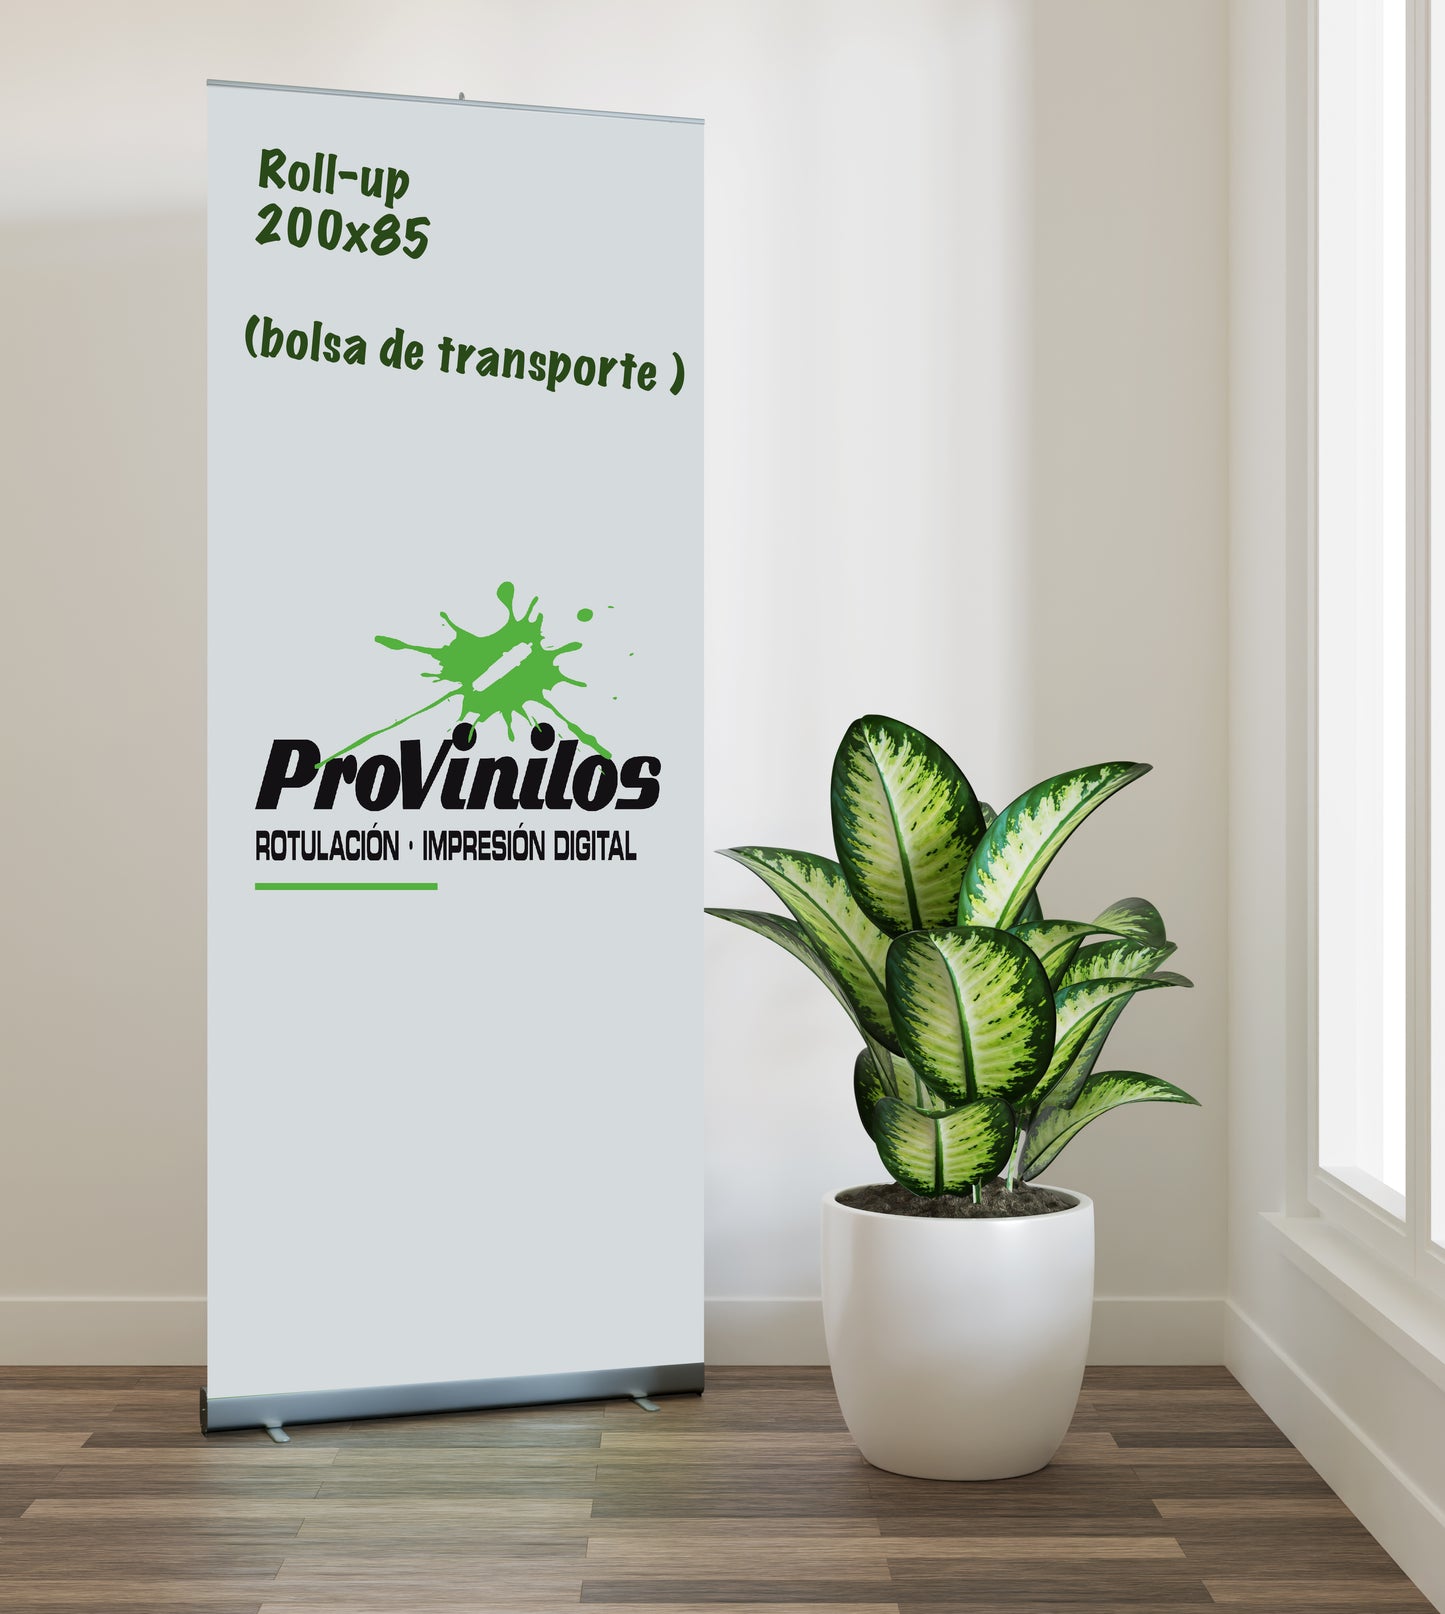 Roll-up 200x85